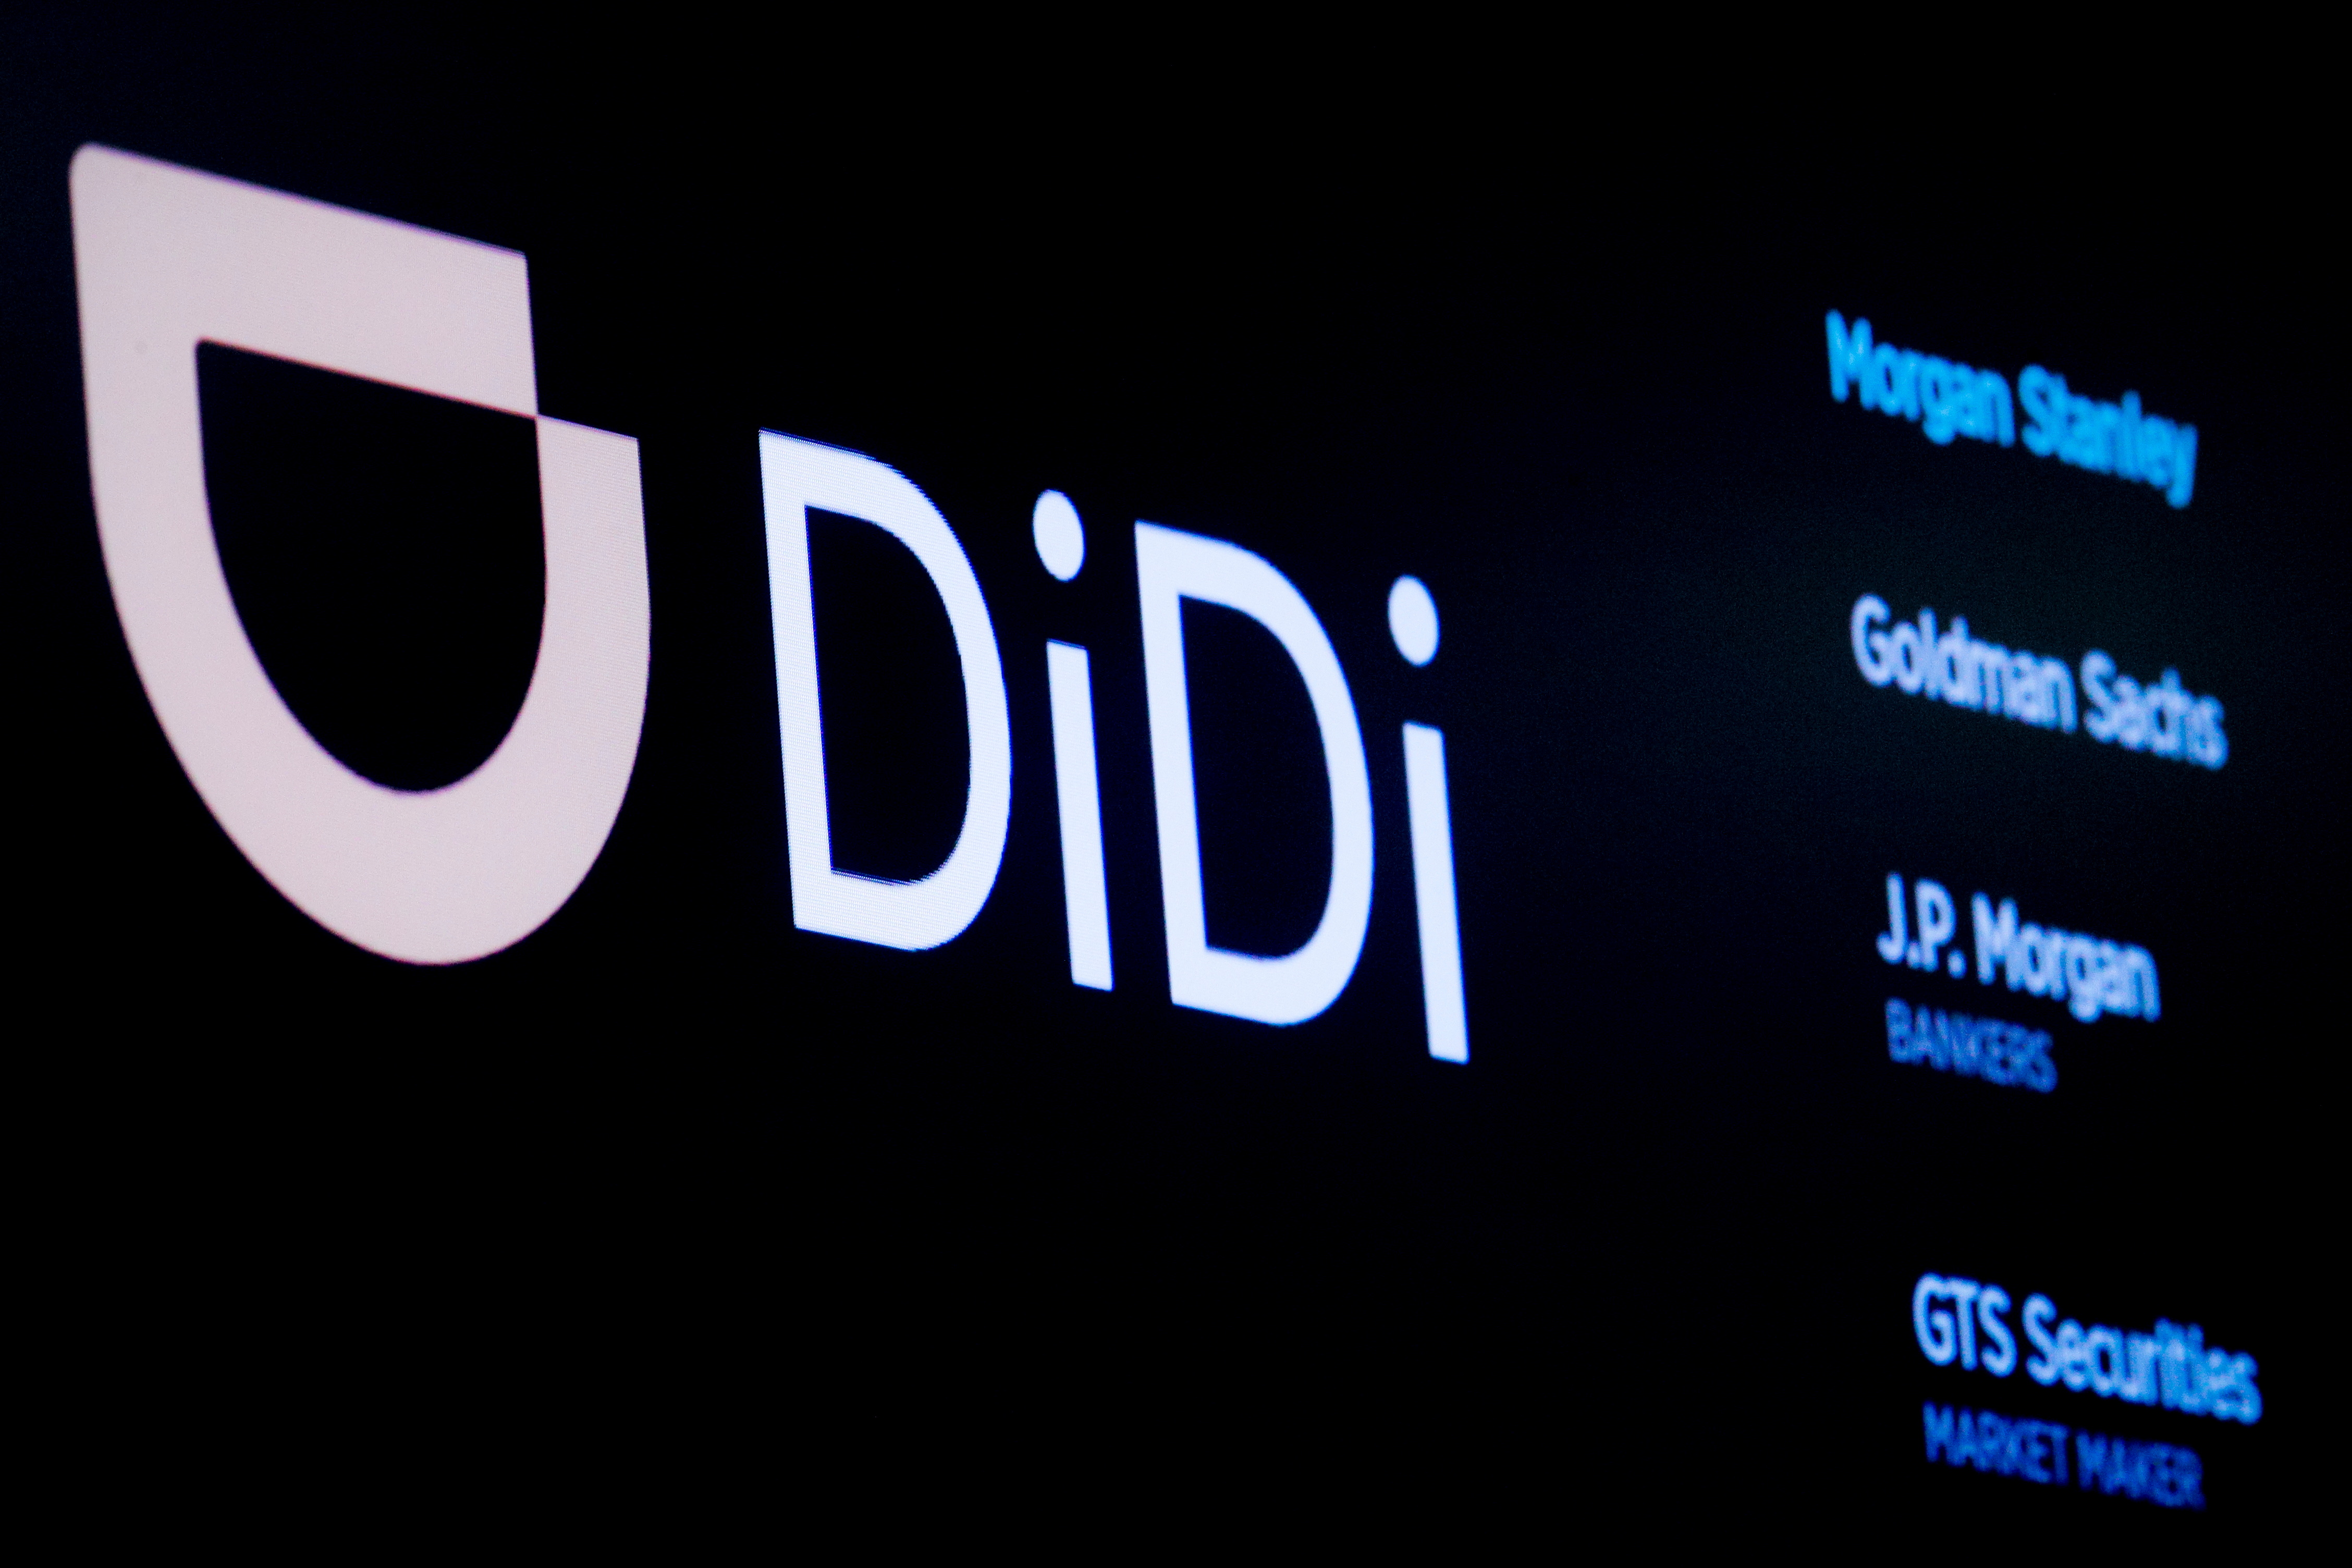 The logo for Chinese ride-hailing company Didi Global Inc is pictured at the New York Stock Exchange (NYSE) floor in New York City, U.S., June 30, 2021.  REUTERS/Brendan McDermid/File Photo